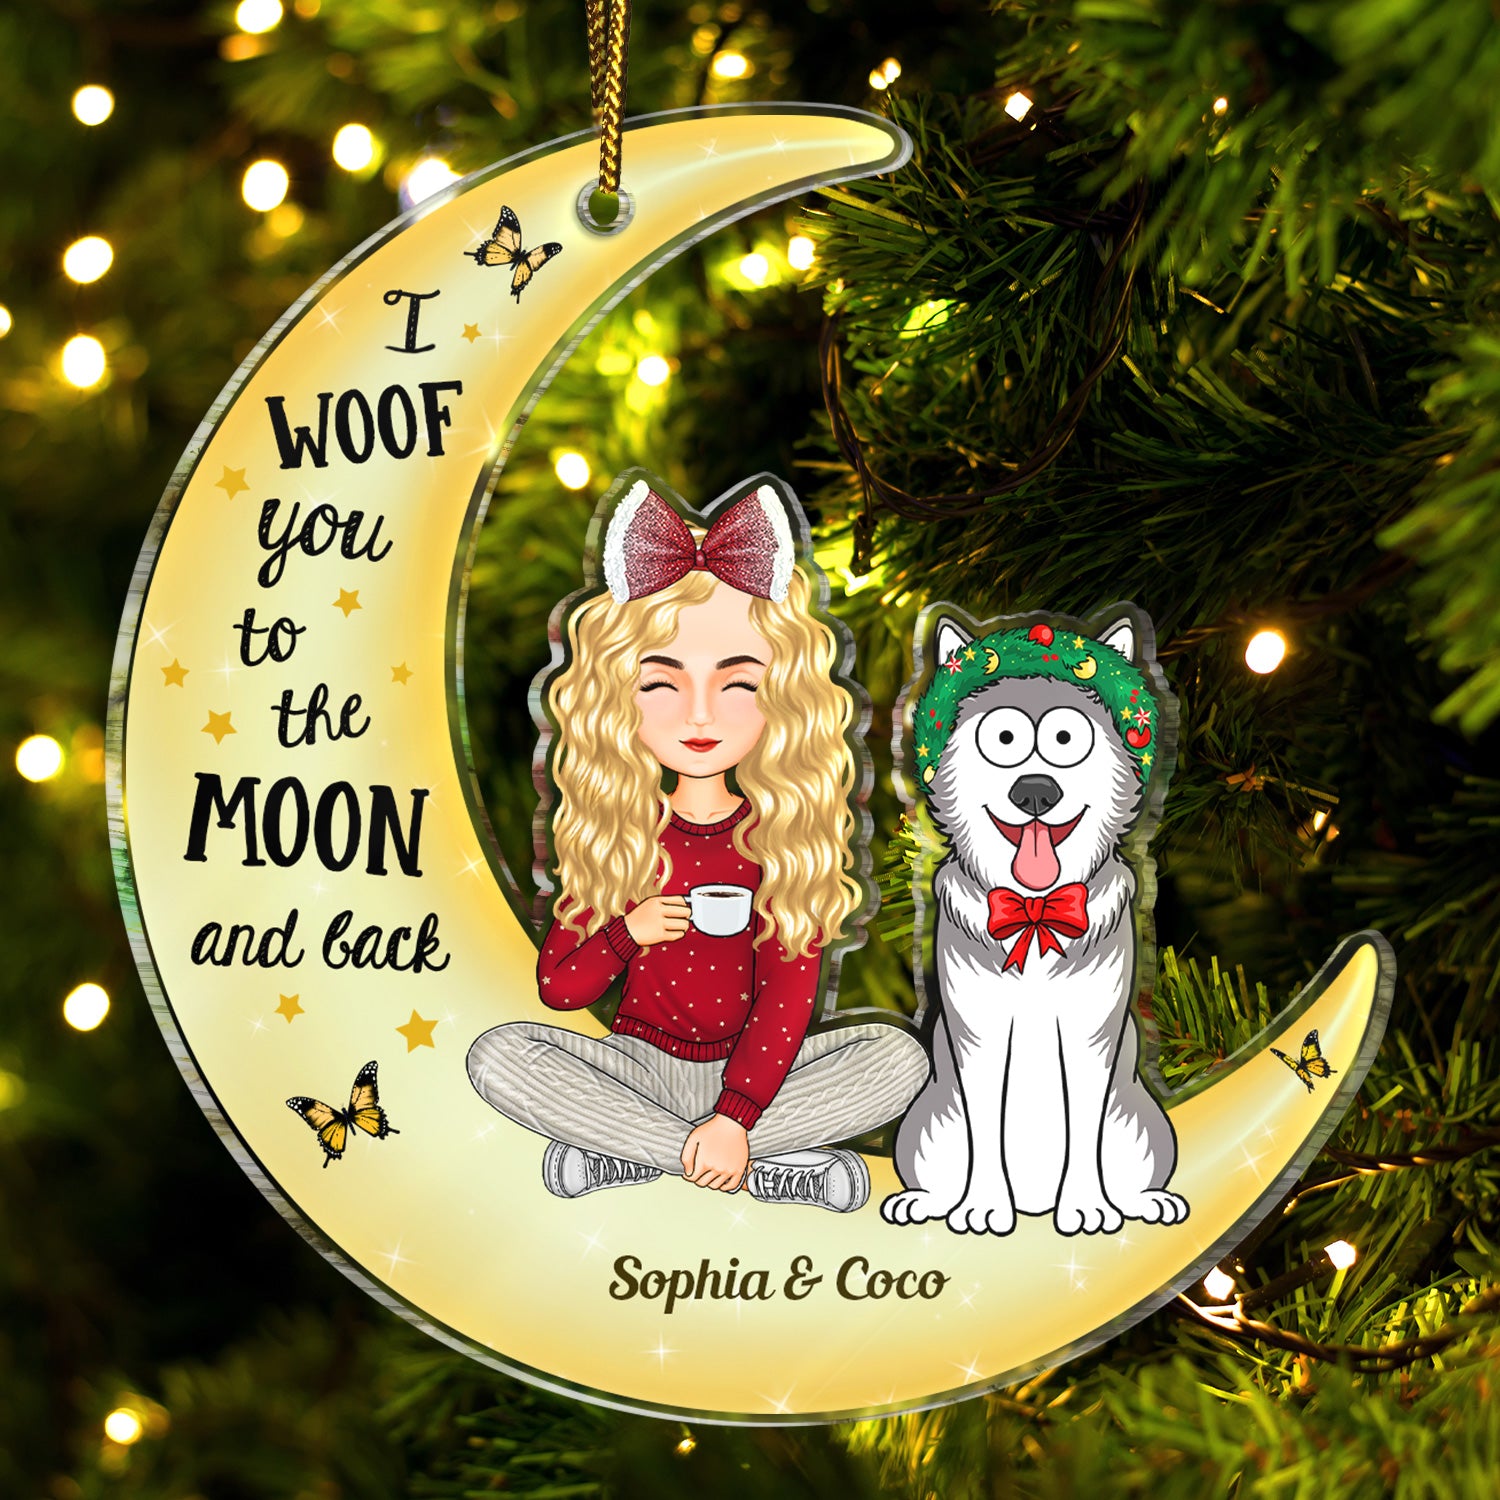 Woof You To The Moon & Back Cartoon Style - Christmas Gift For Dog Lovers, Dog Mom, Dog Dad - Personalized Cutout Acrylic Ornament